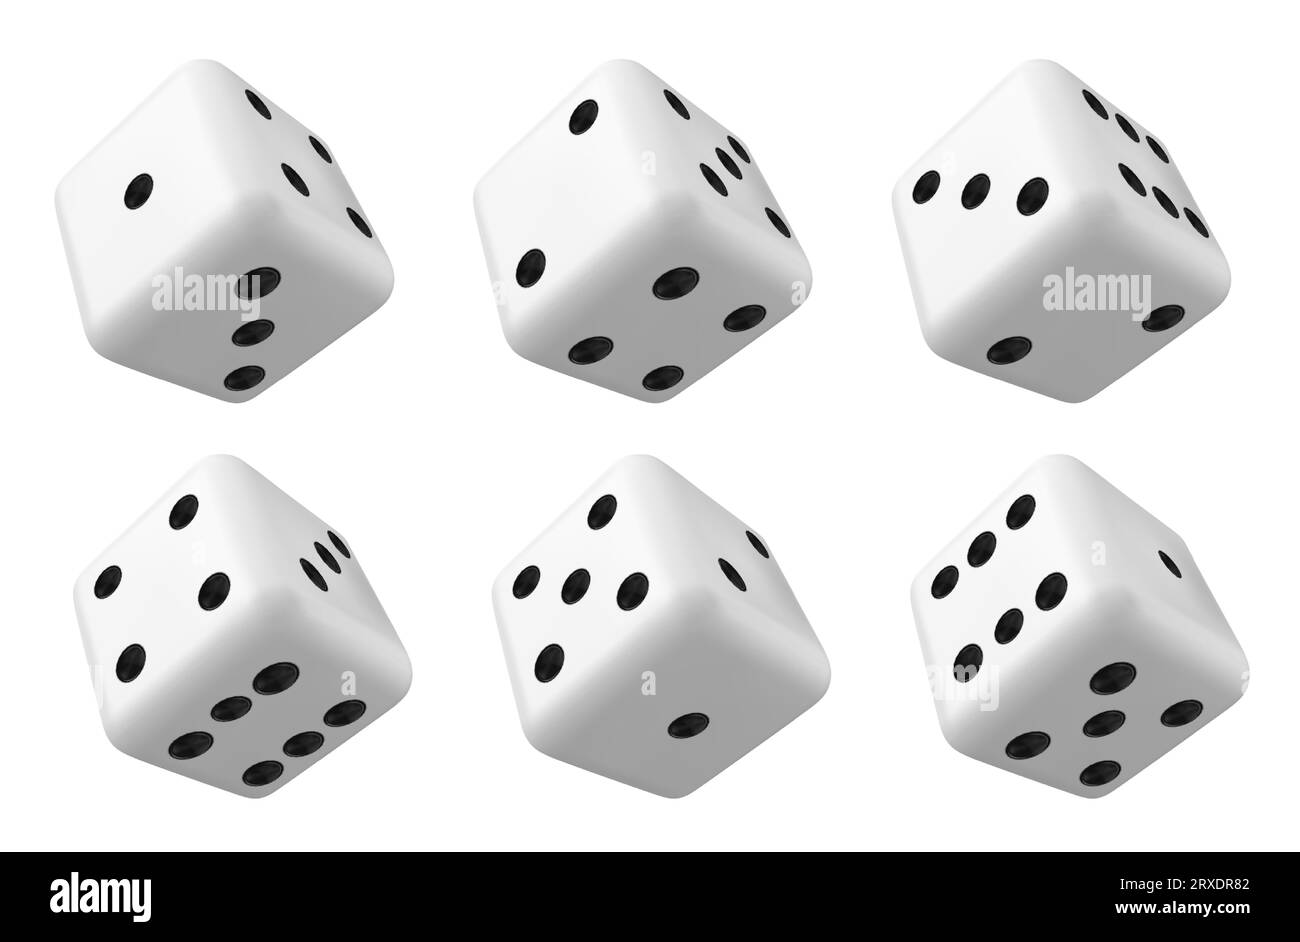 Play 3d isolated white casino game dice vector. Realistic rolling die gambling cube object set. Lucky roll chance with three, two, 6, and 1 object side illustration. Risk vegas backgammon opportunity Stock Vector